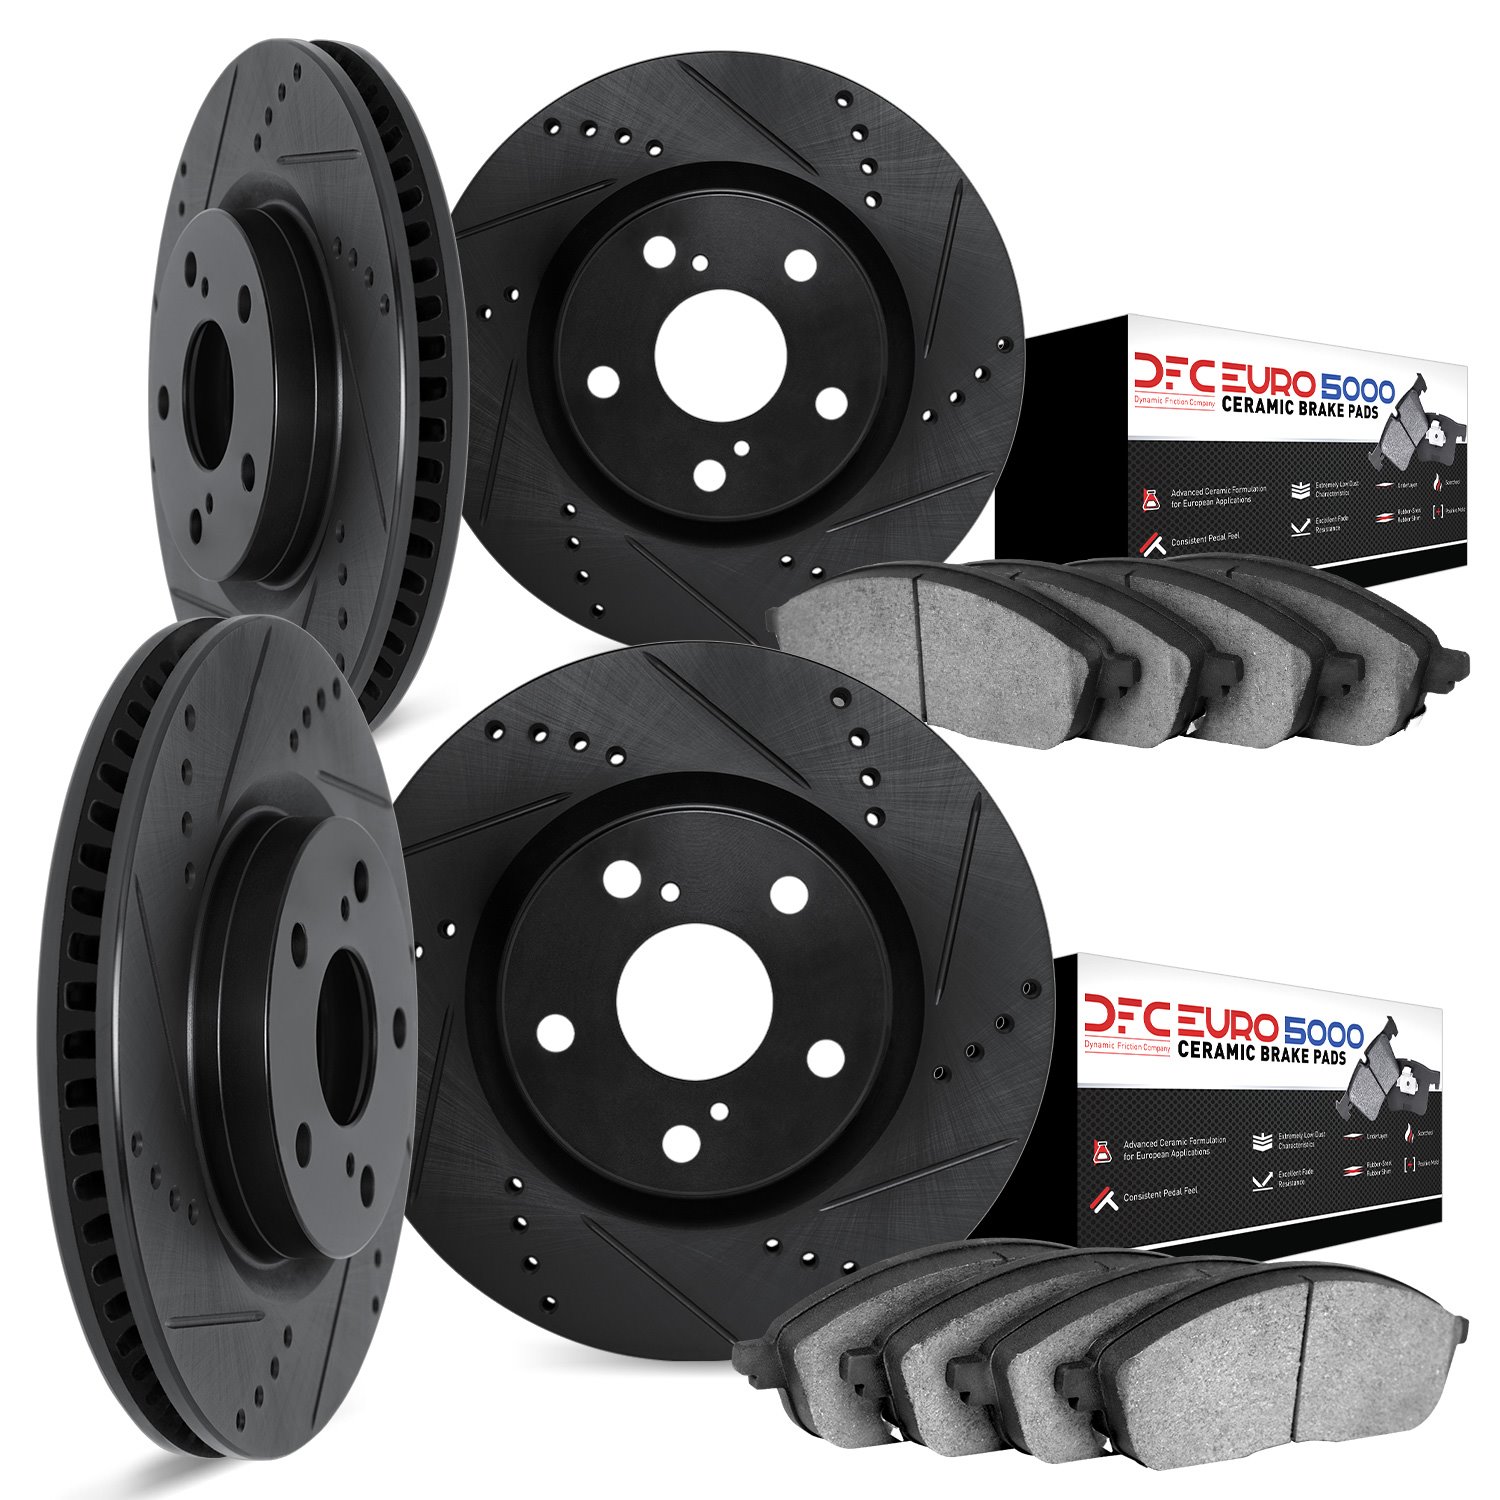 8604-63017 Drilled/Slotted Brake Rotors w/5000 Euro Ceramic Brake Pads Kit [Black], 2017-2017 Mercedes-Benz, Position: Front and